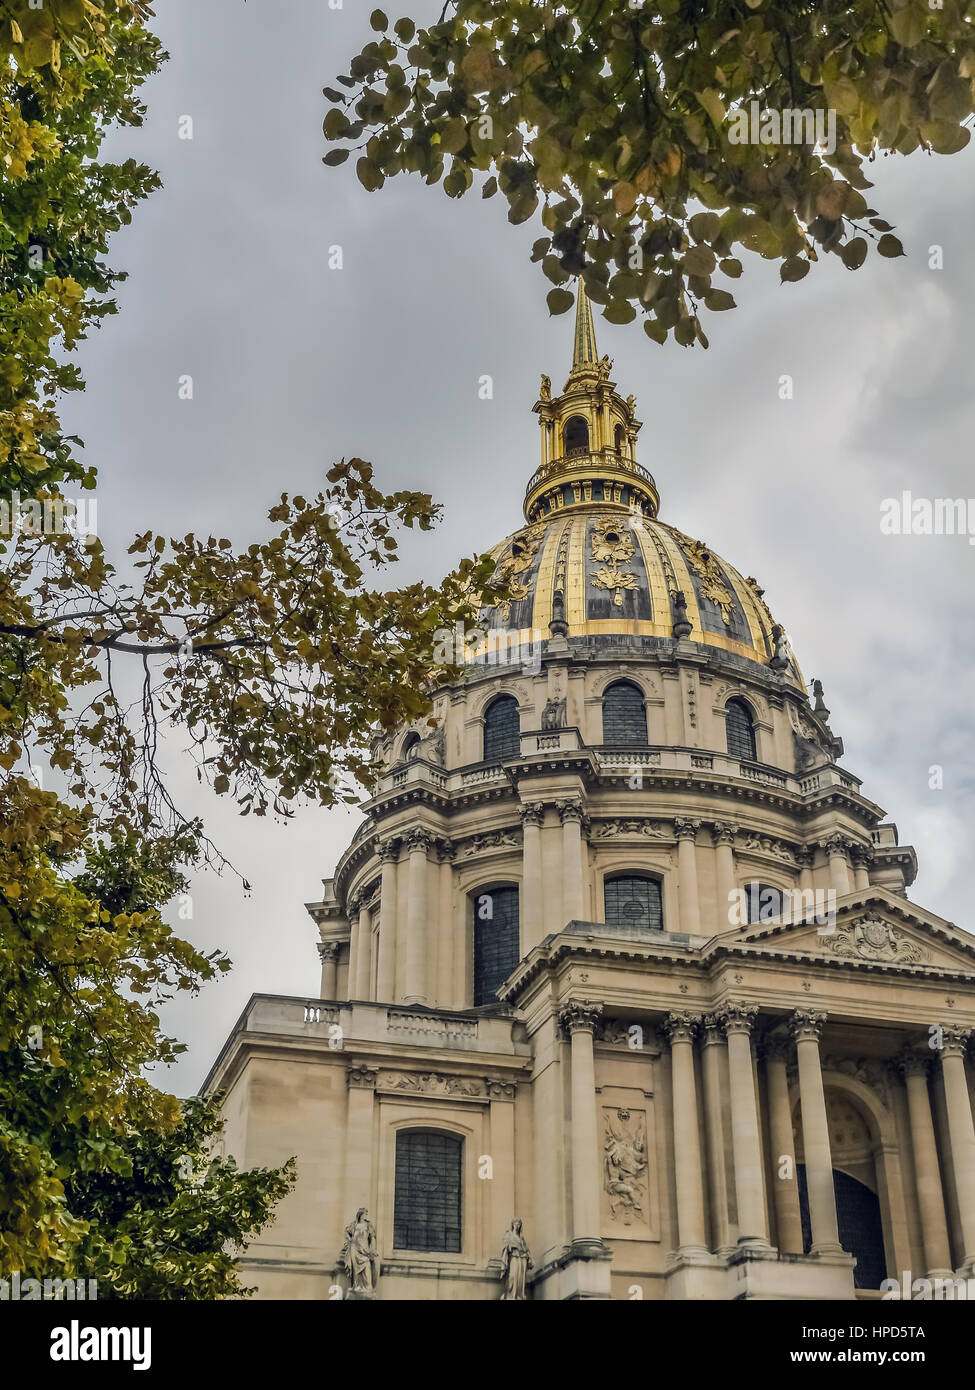 Closeup of Saint-Louis-des-Invalides Cathedral, part of The National Residence of the Invalids also known as Hôtel des Invalides, Paris, France Stock Photo